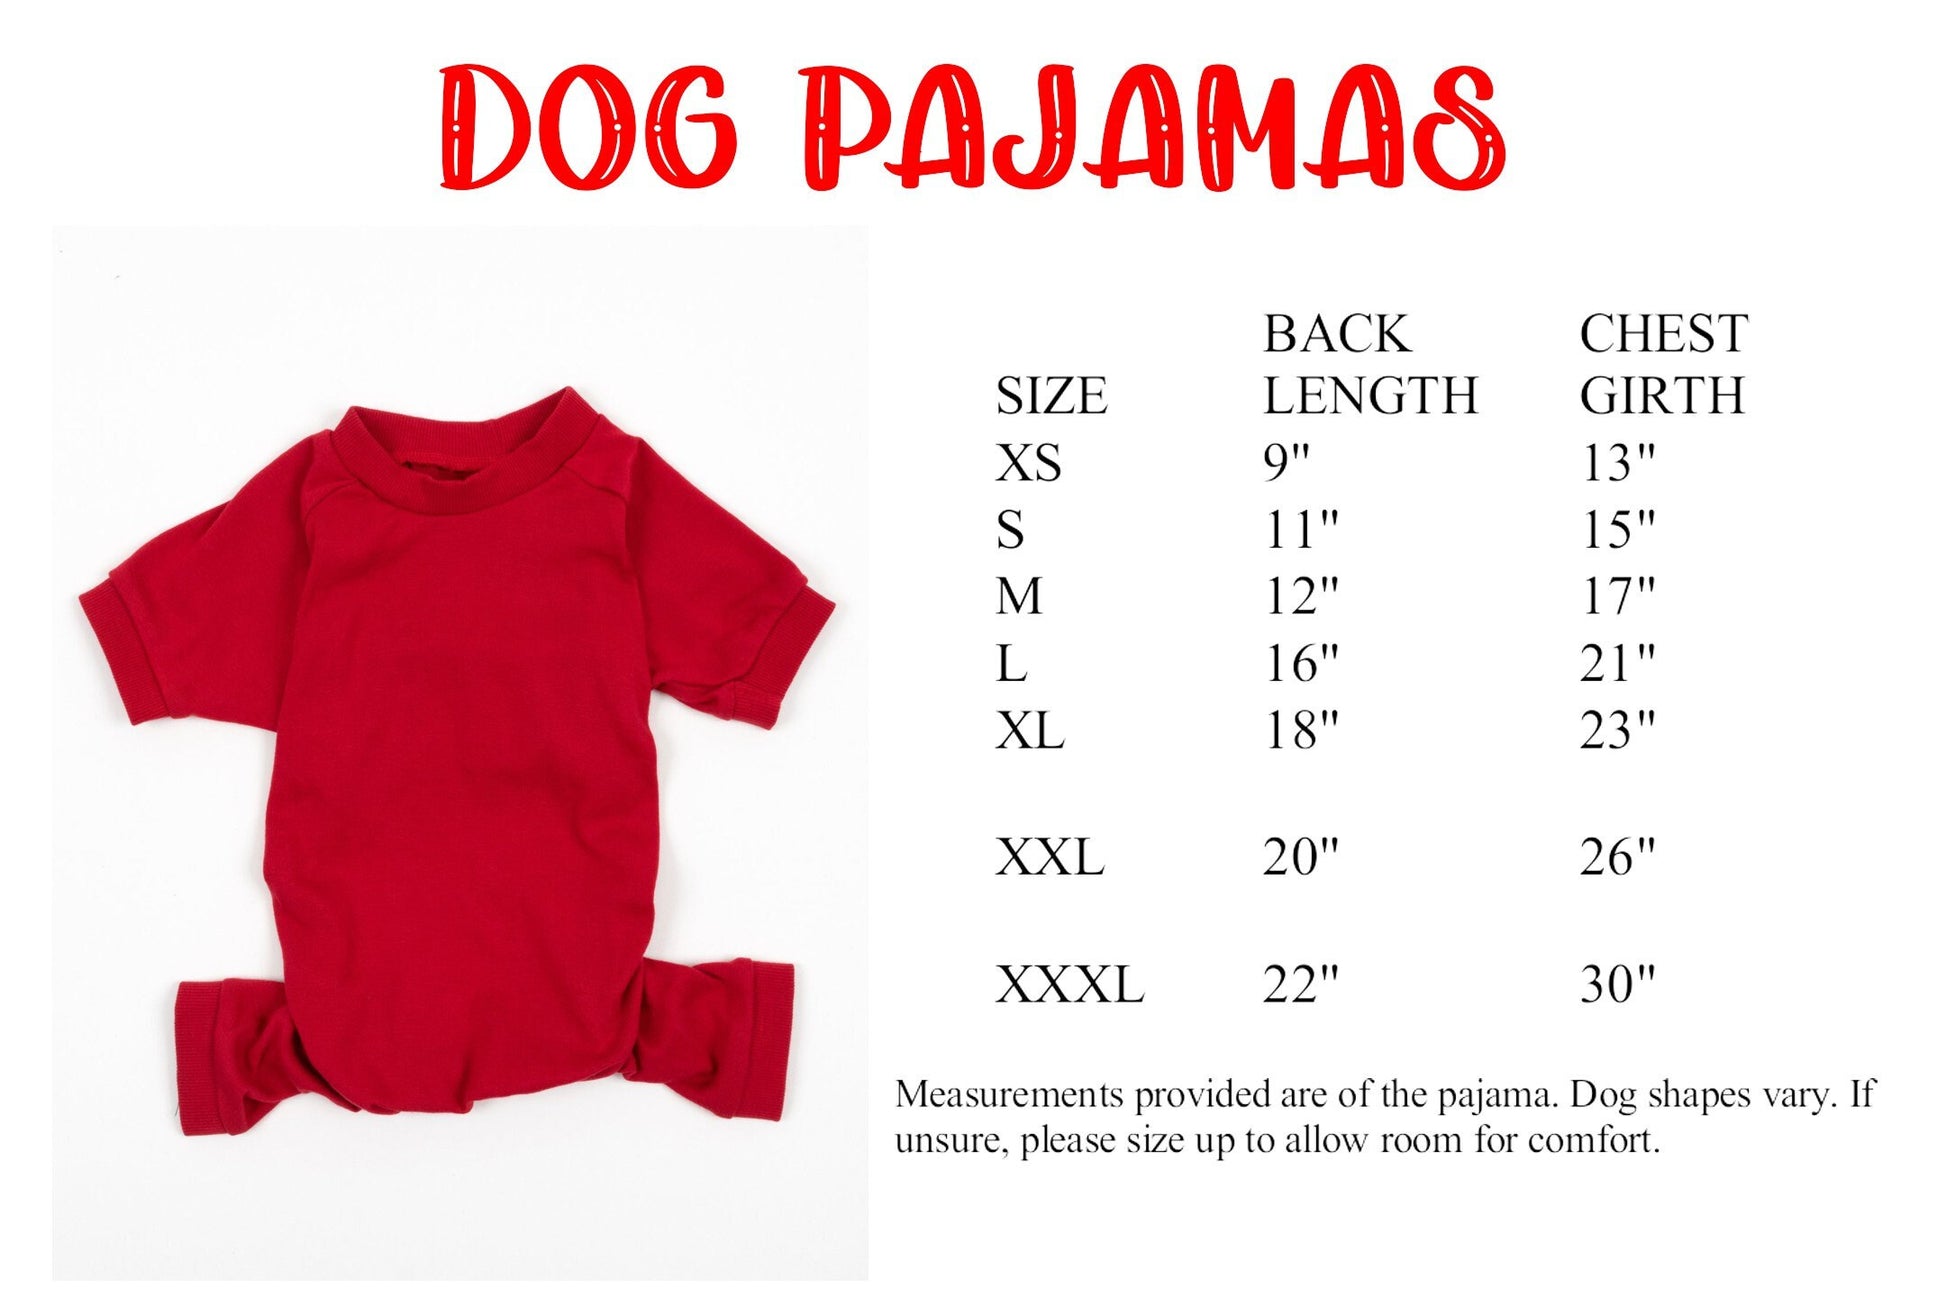 Cutest Valentine Ever Red Striped Pajamas, mommy and me pjs, valentines pajamas for the family, dog pajamas, family pajamas, valentines day